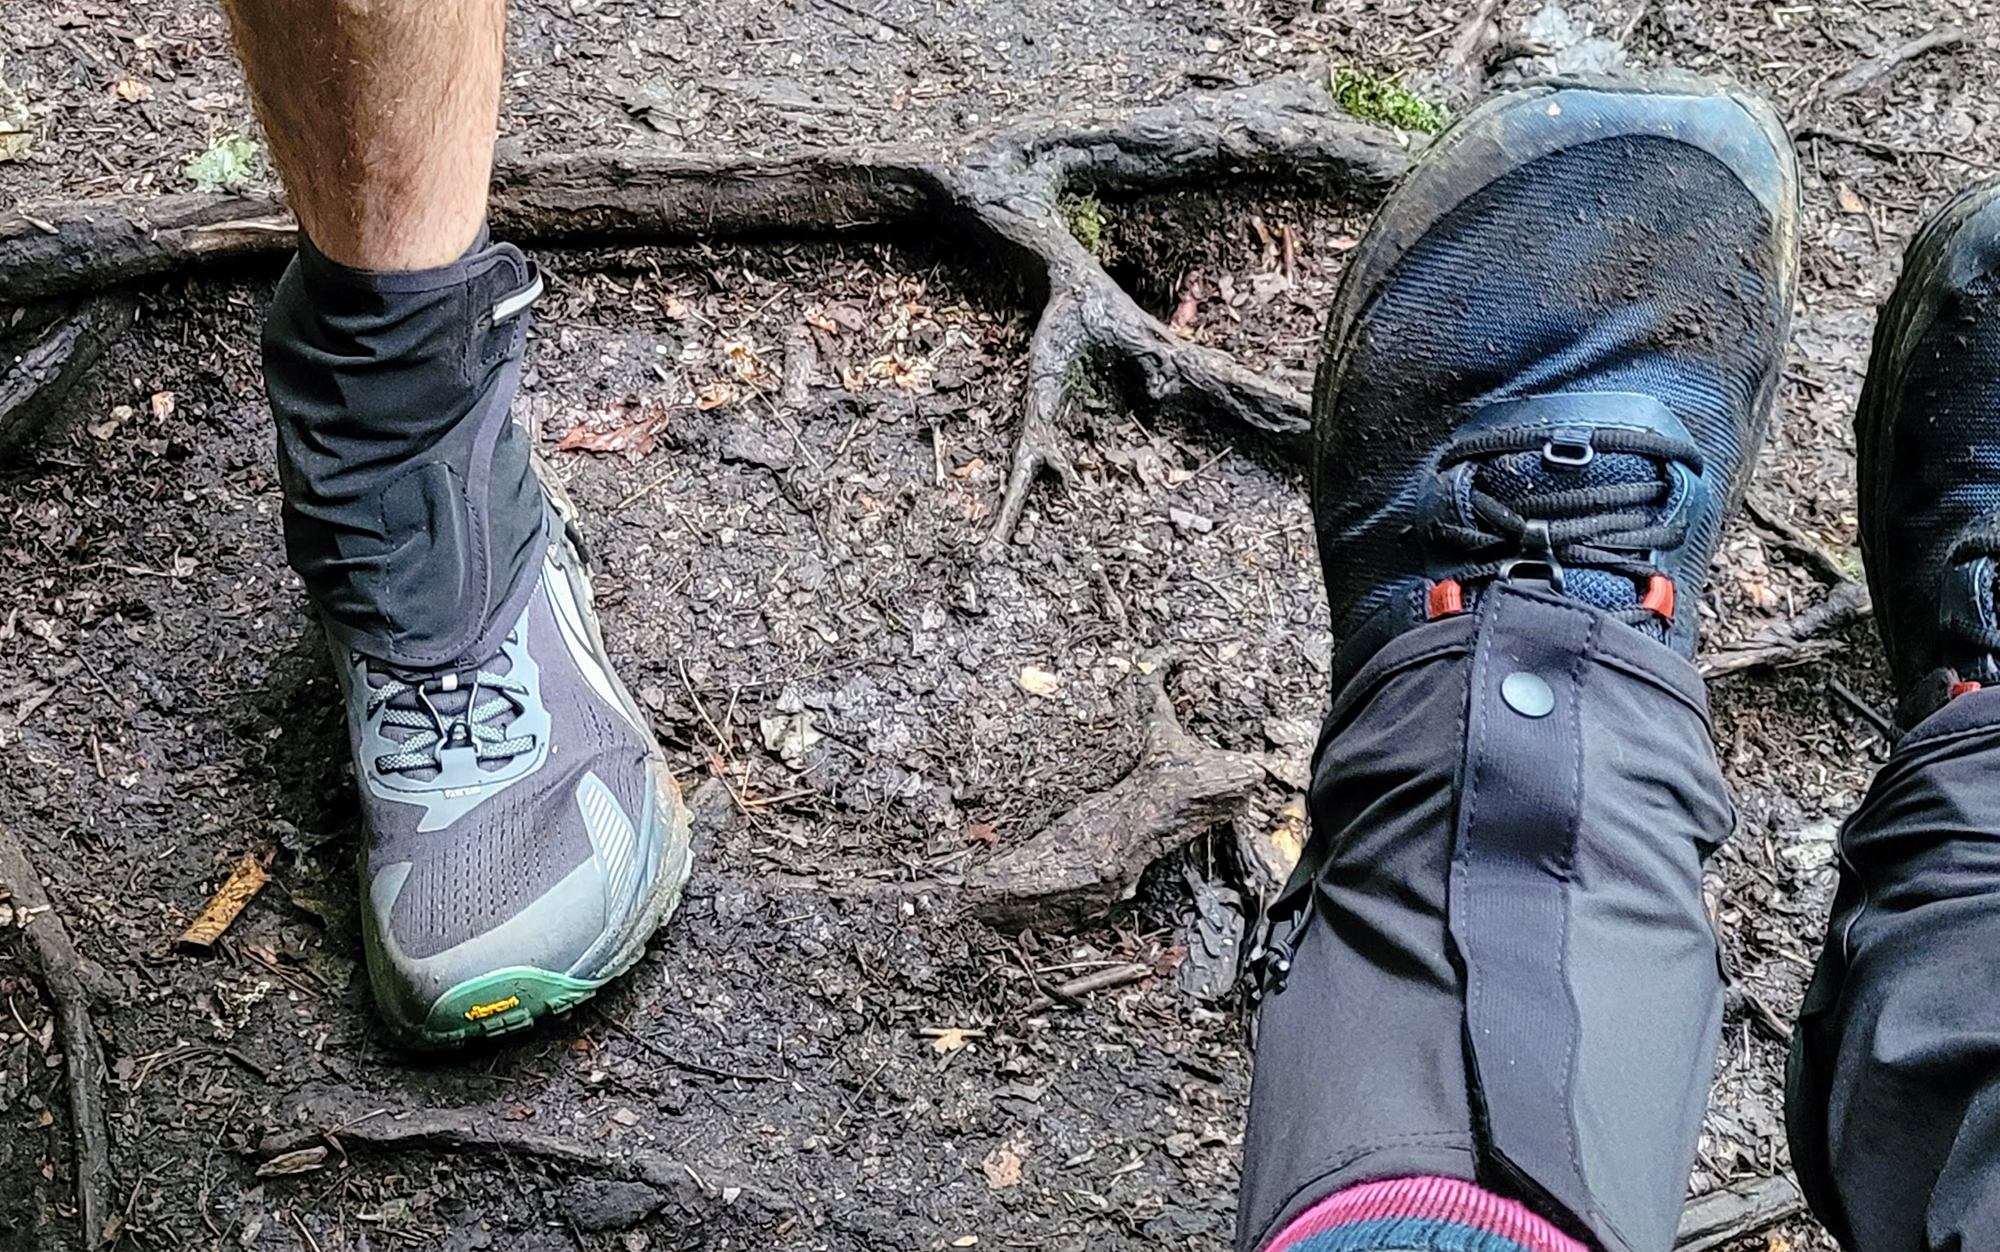 Hooks are used to connect hiking gaiters to the upper shoe.